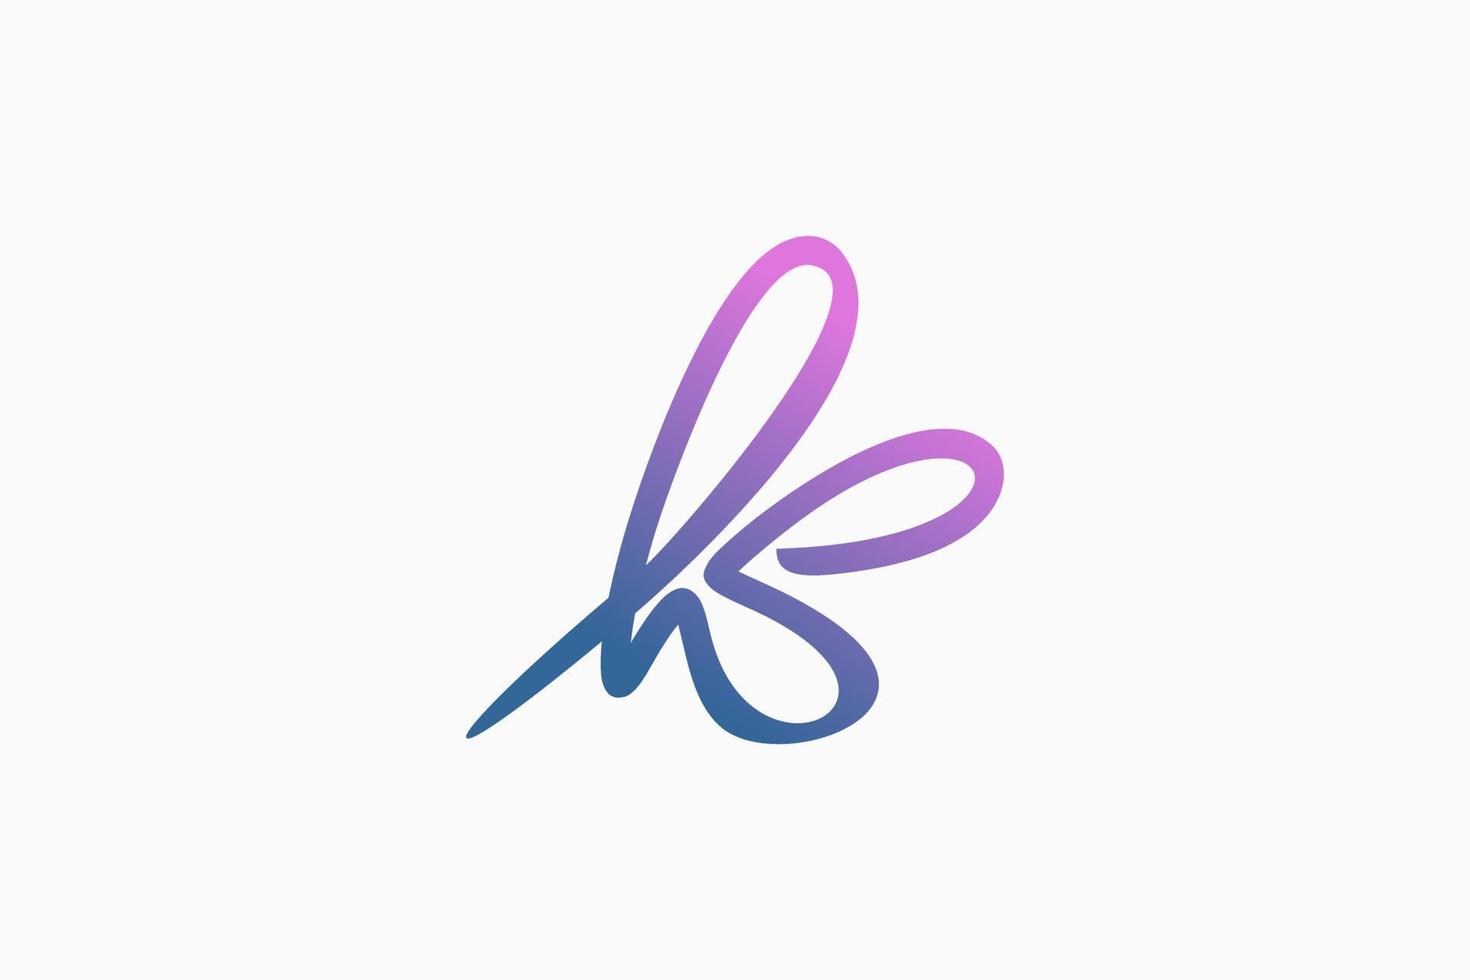 Letter k logo with creative handwritten concept of butterfly shape vector